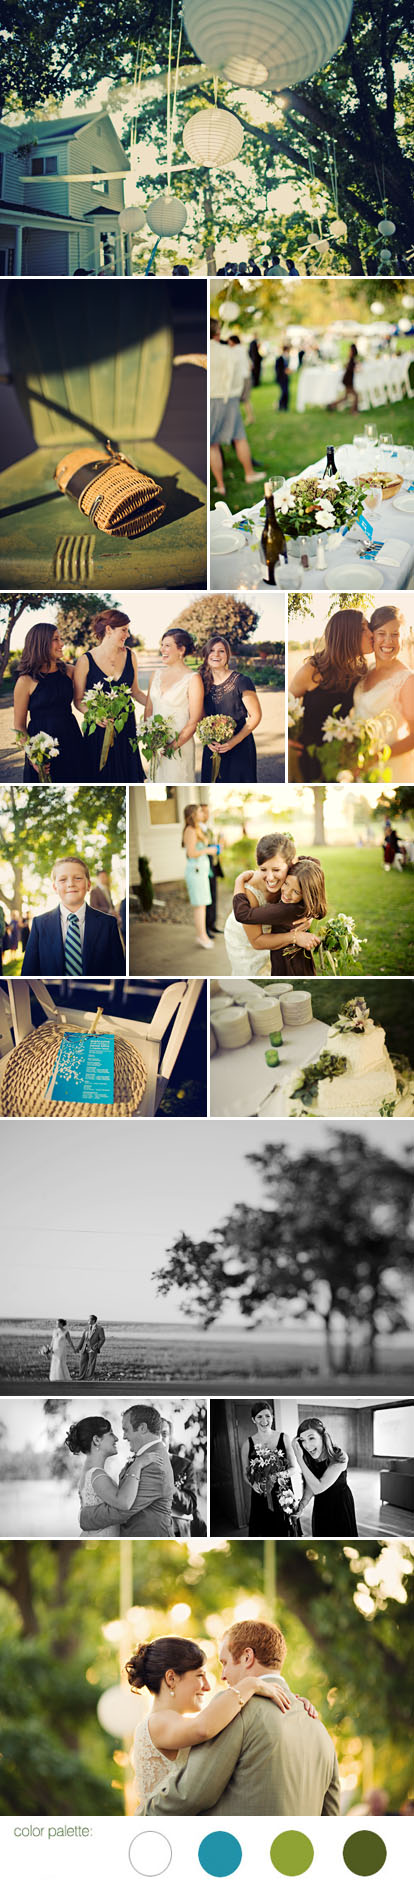 Sean Flanigan Photography, green, white and blue summer wedding color palette, casual wedding style